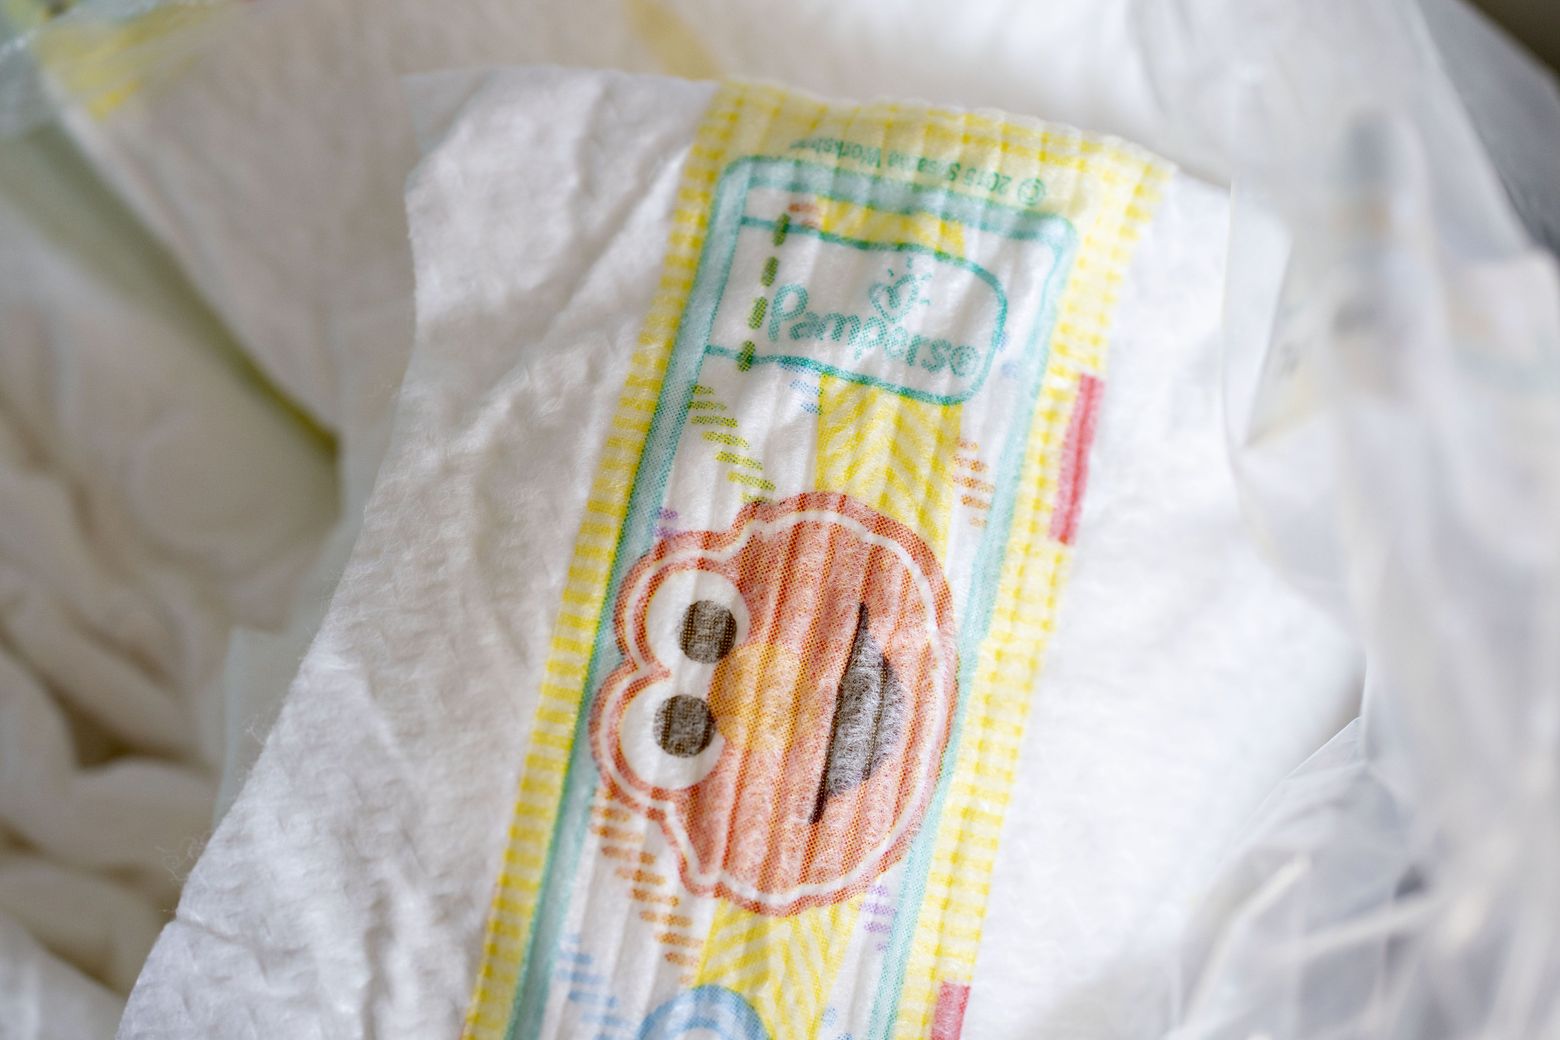 P G Hopes To Develop Recyclable Diaper In Battle Against Waste The Seattle Times